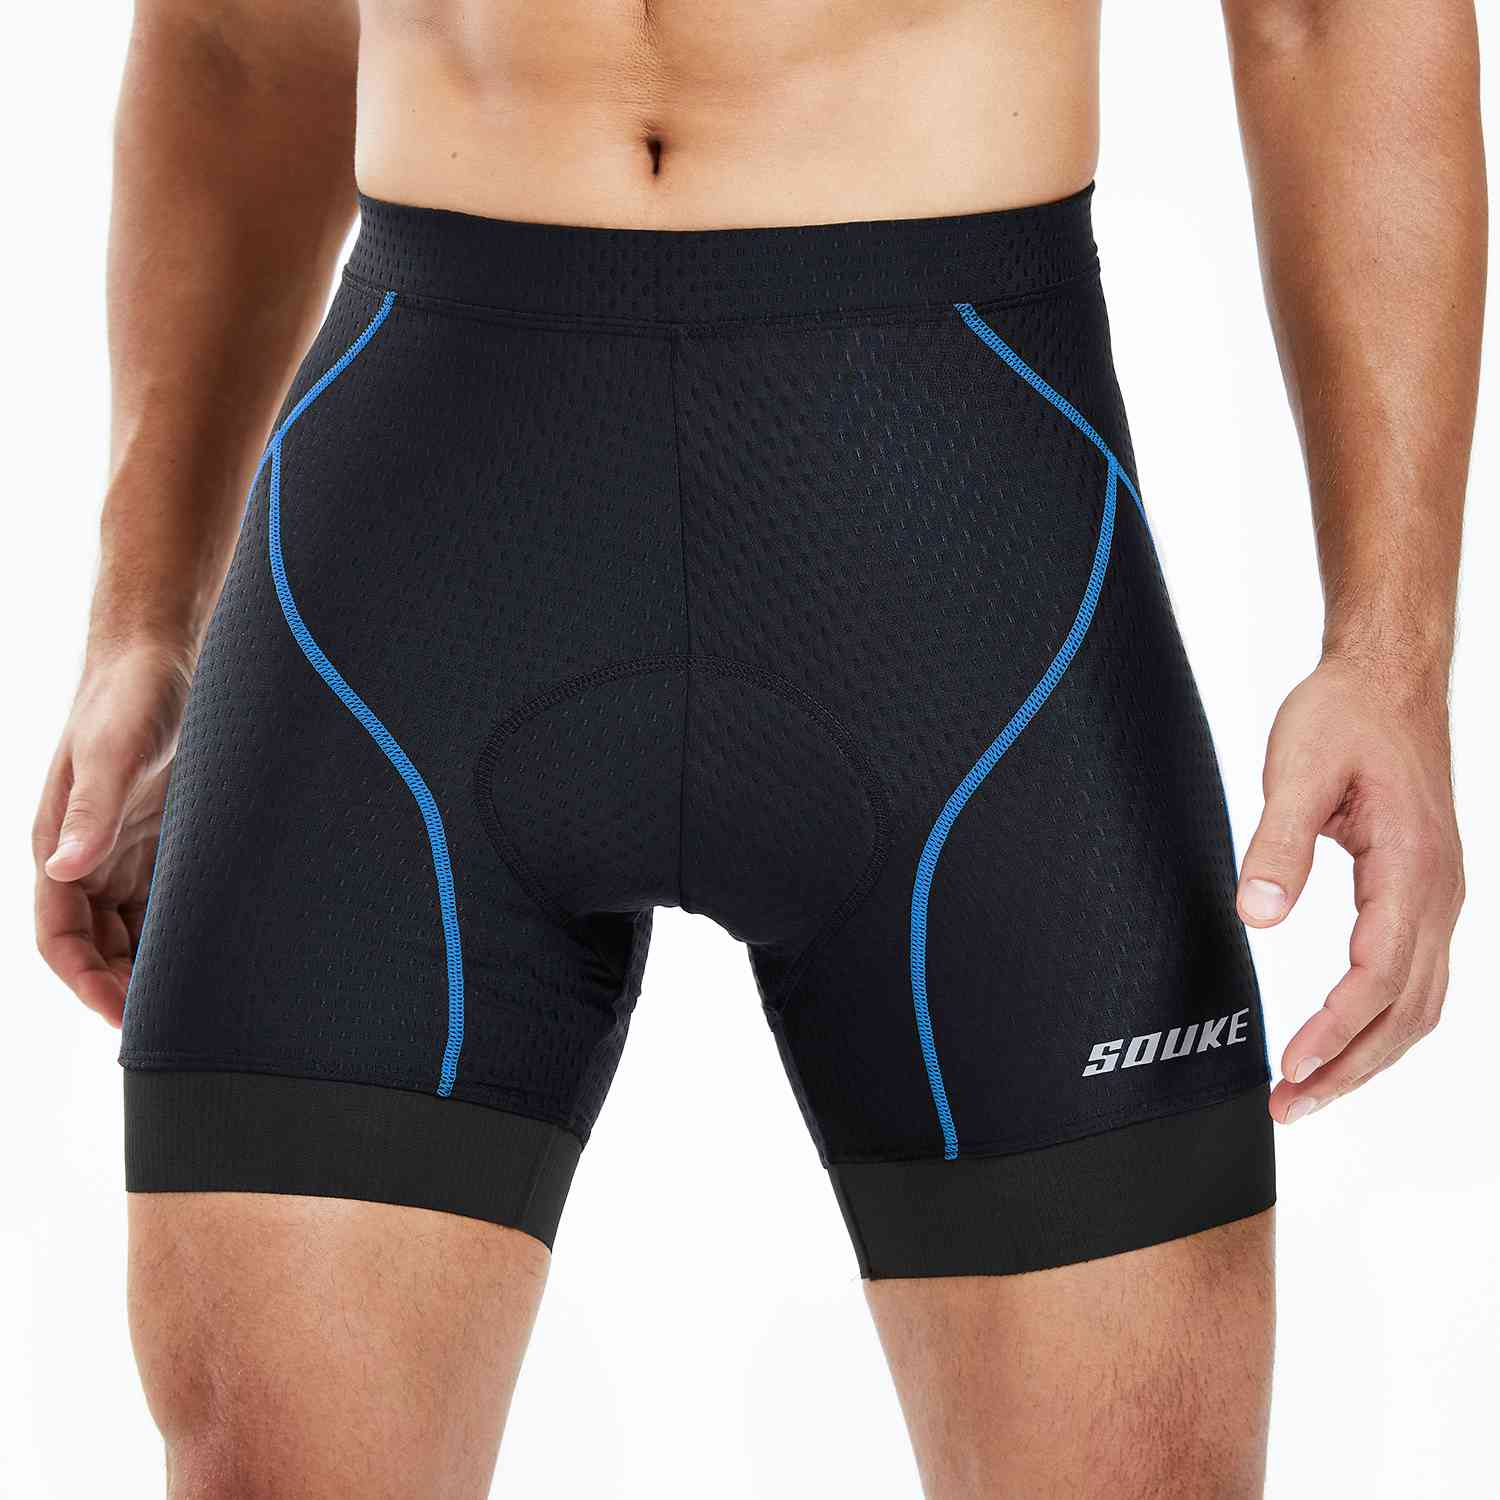 Souke Men's 4D Padded Quick Dry Cycling Underwear-PS6021-Light Blue